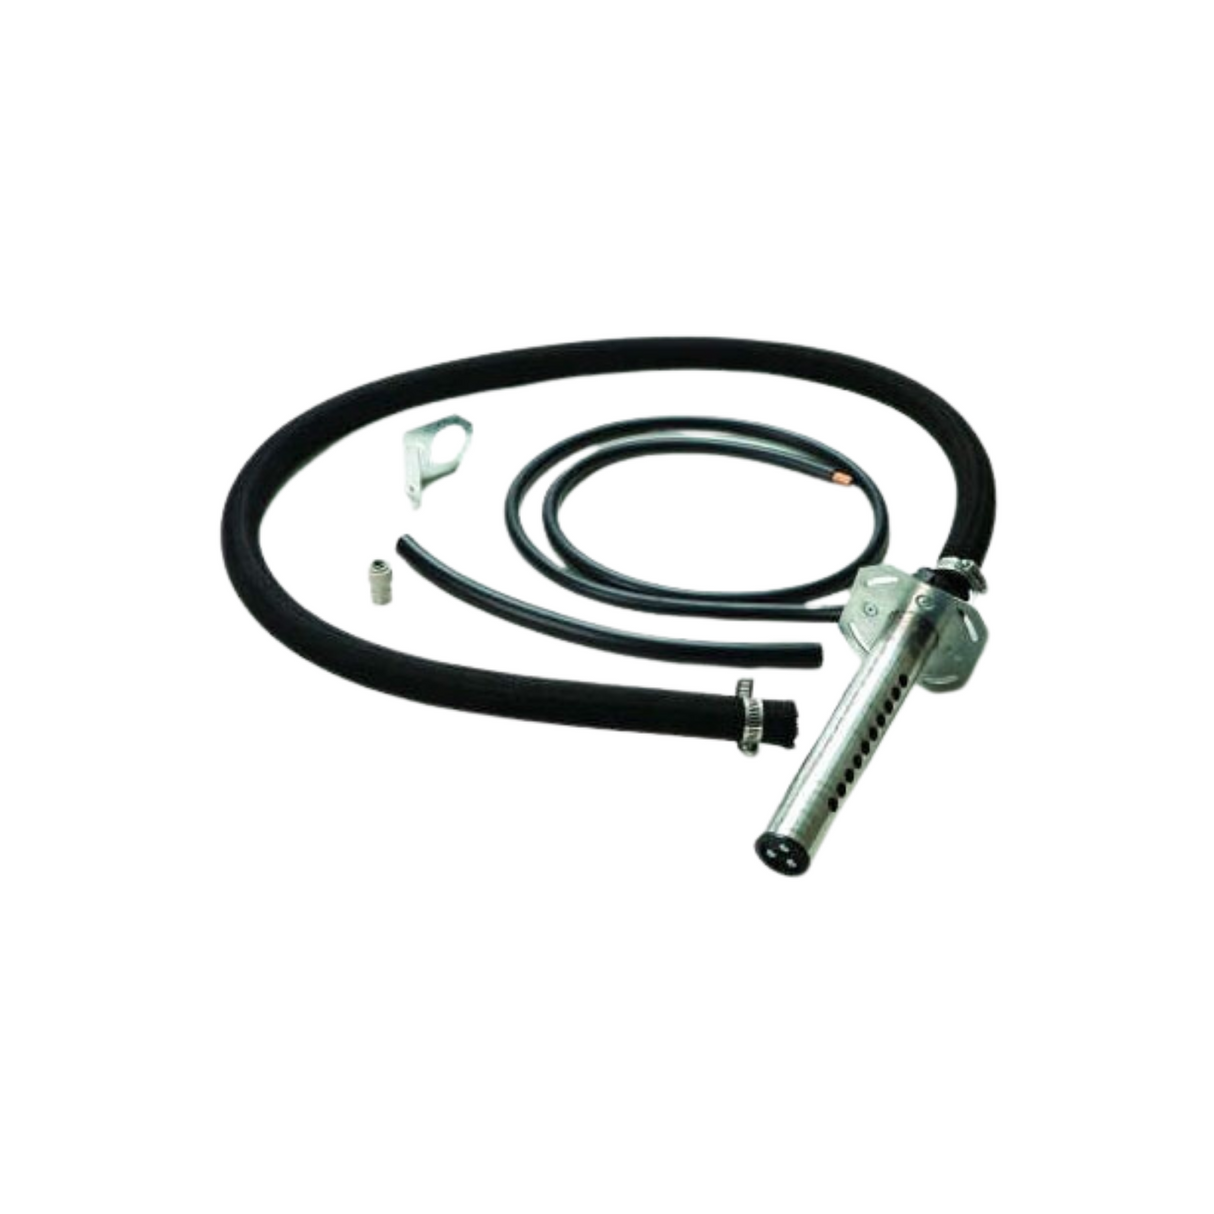 Honeywell HM700ADISTKIT - Distribution Remote Mount Kit, Stainless Steel, Includes 5' Insulated Steam Hose, Steam Distributor, Condensate Hose, Used with HM700 Electrode Humidifier